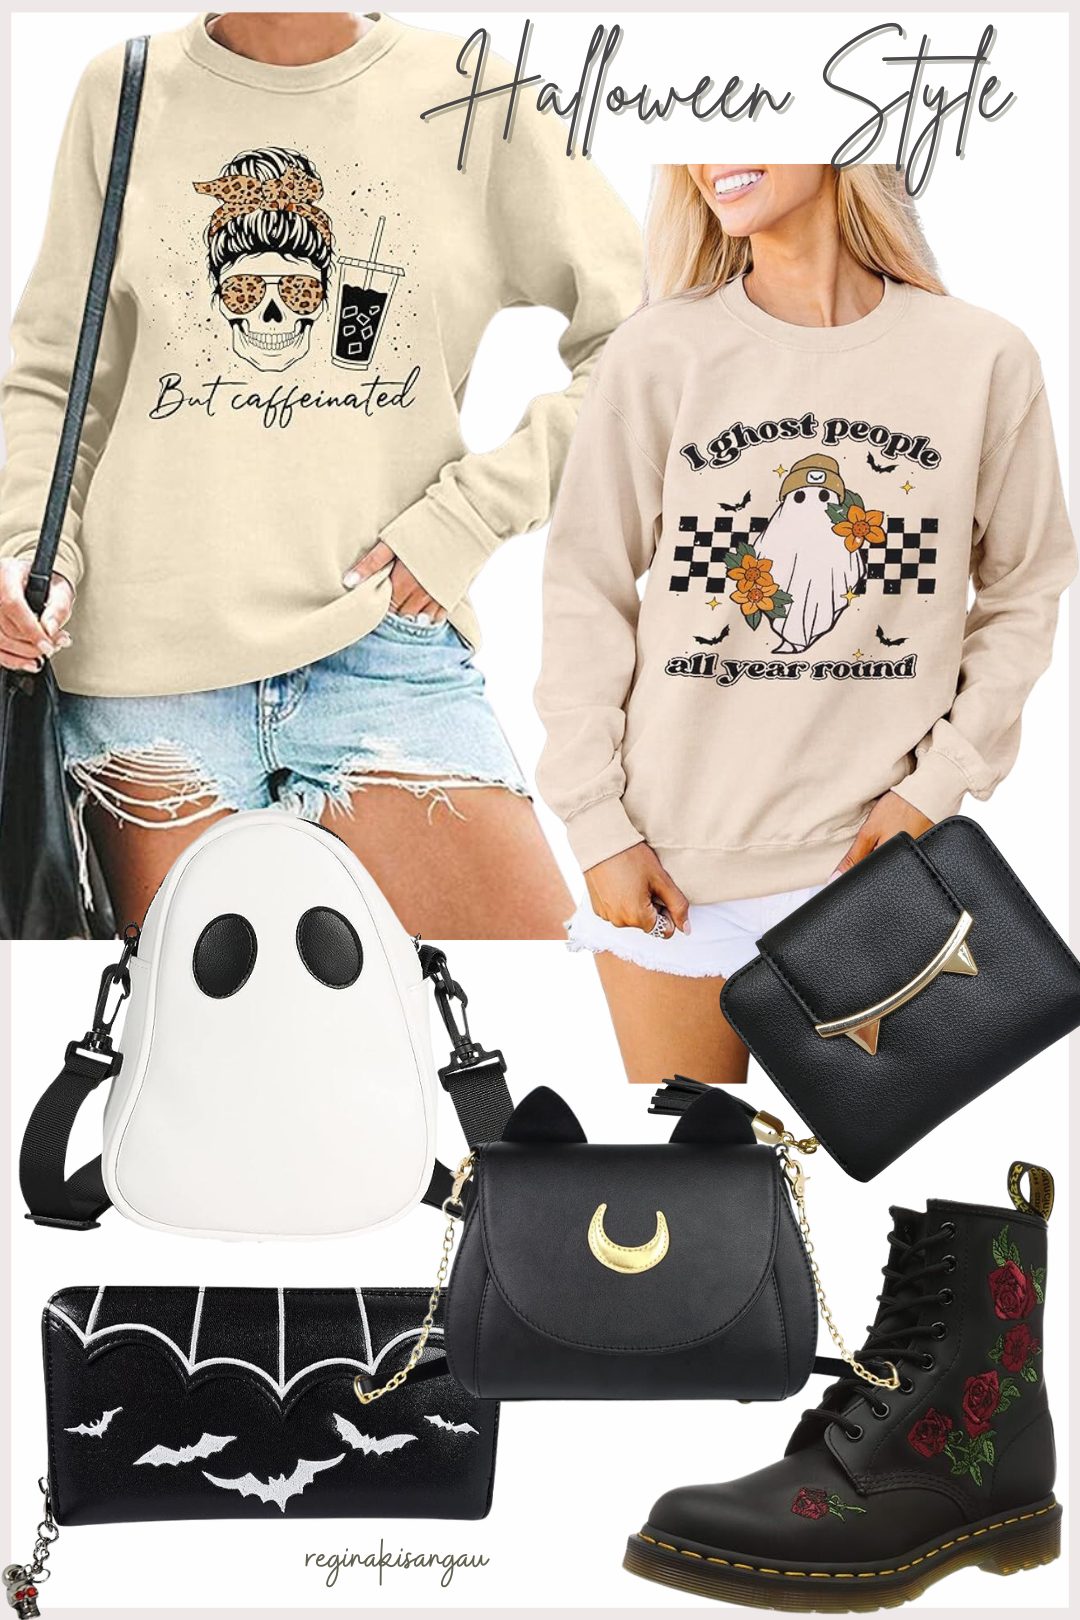 Halloween Outfits and Accessories